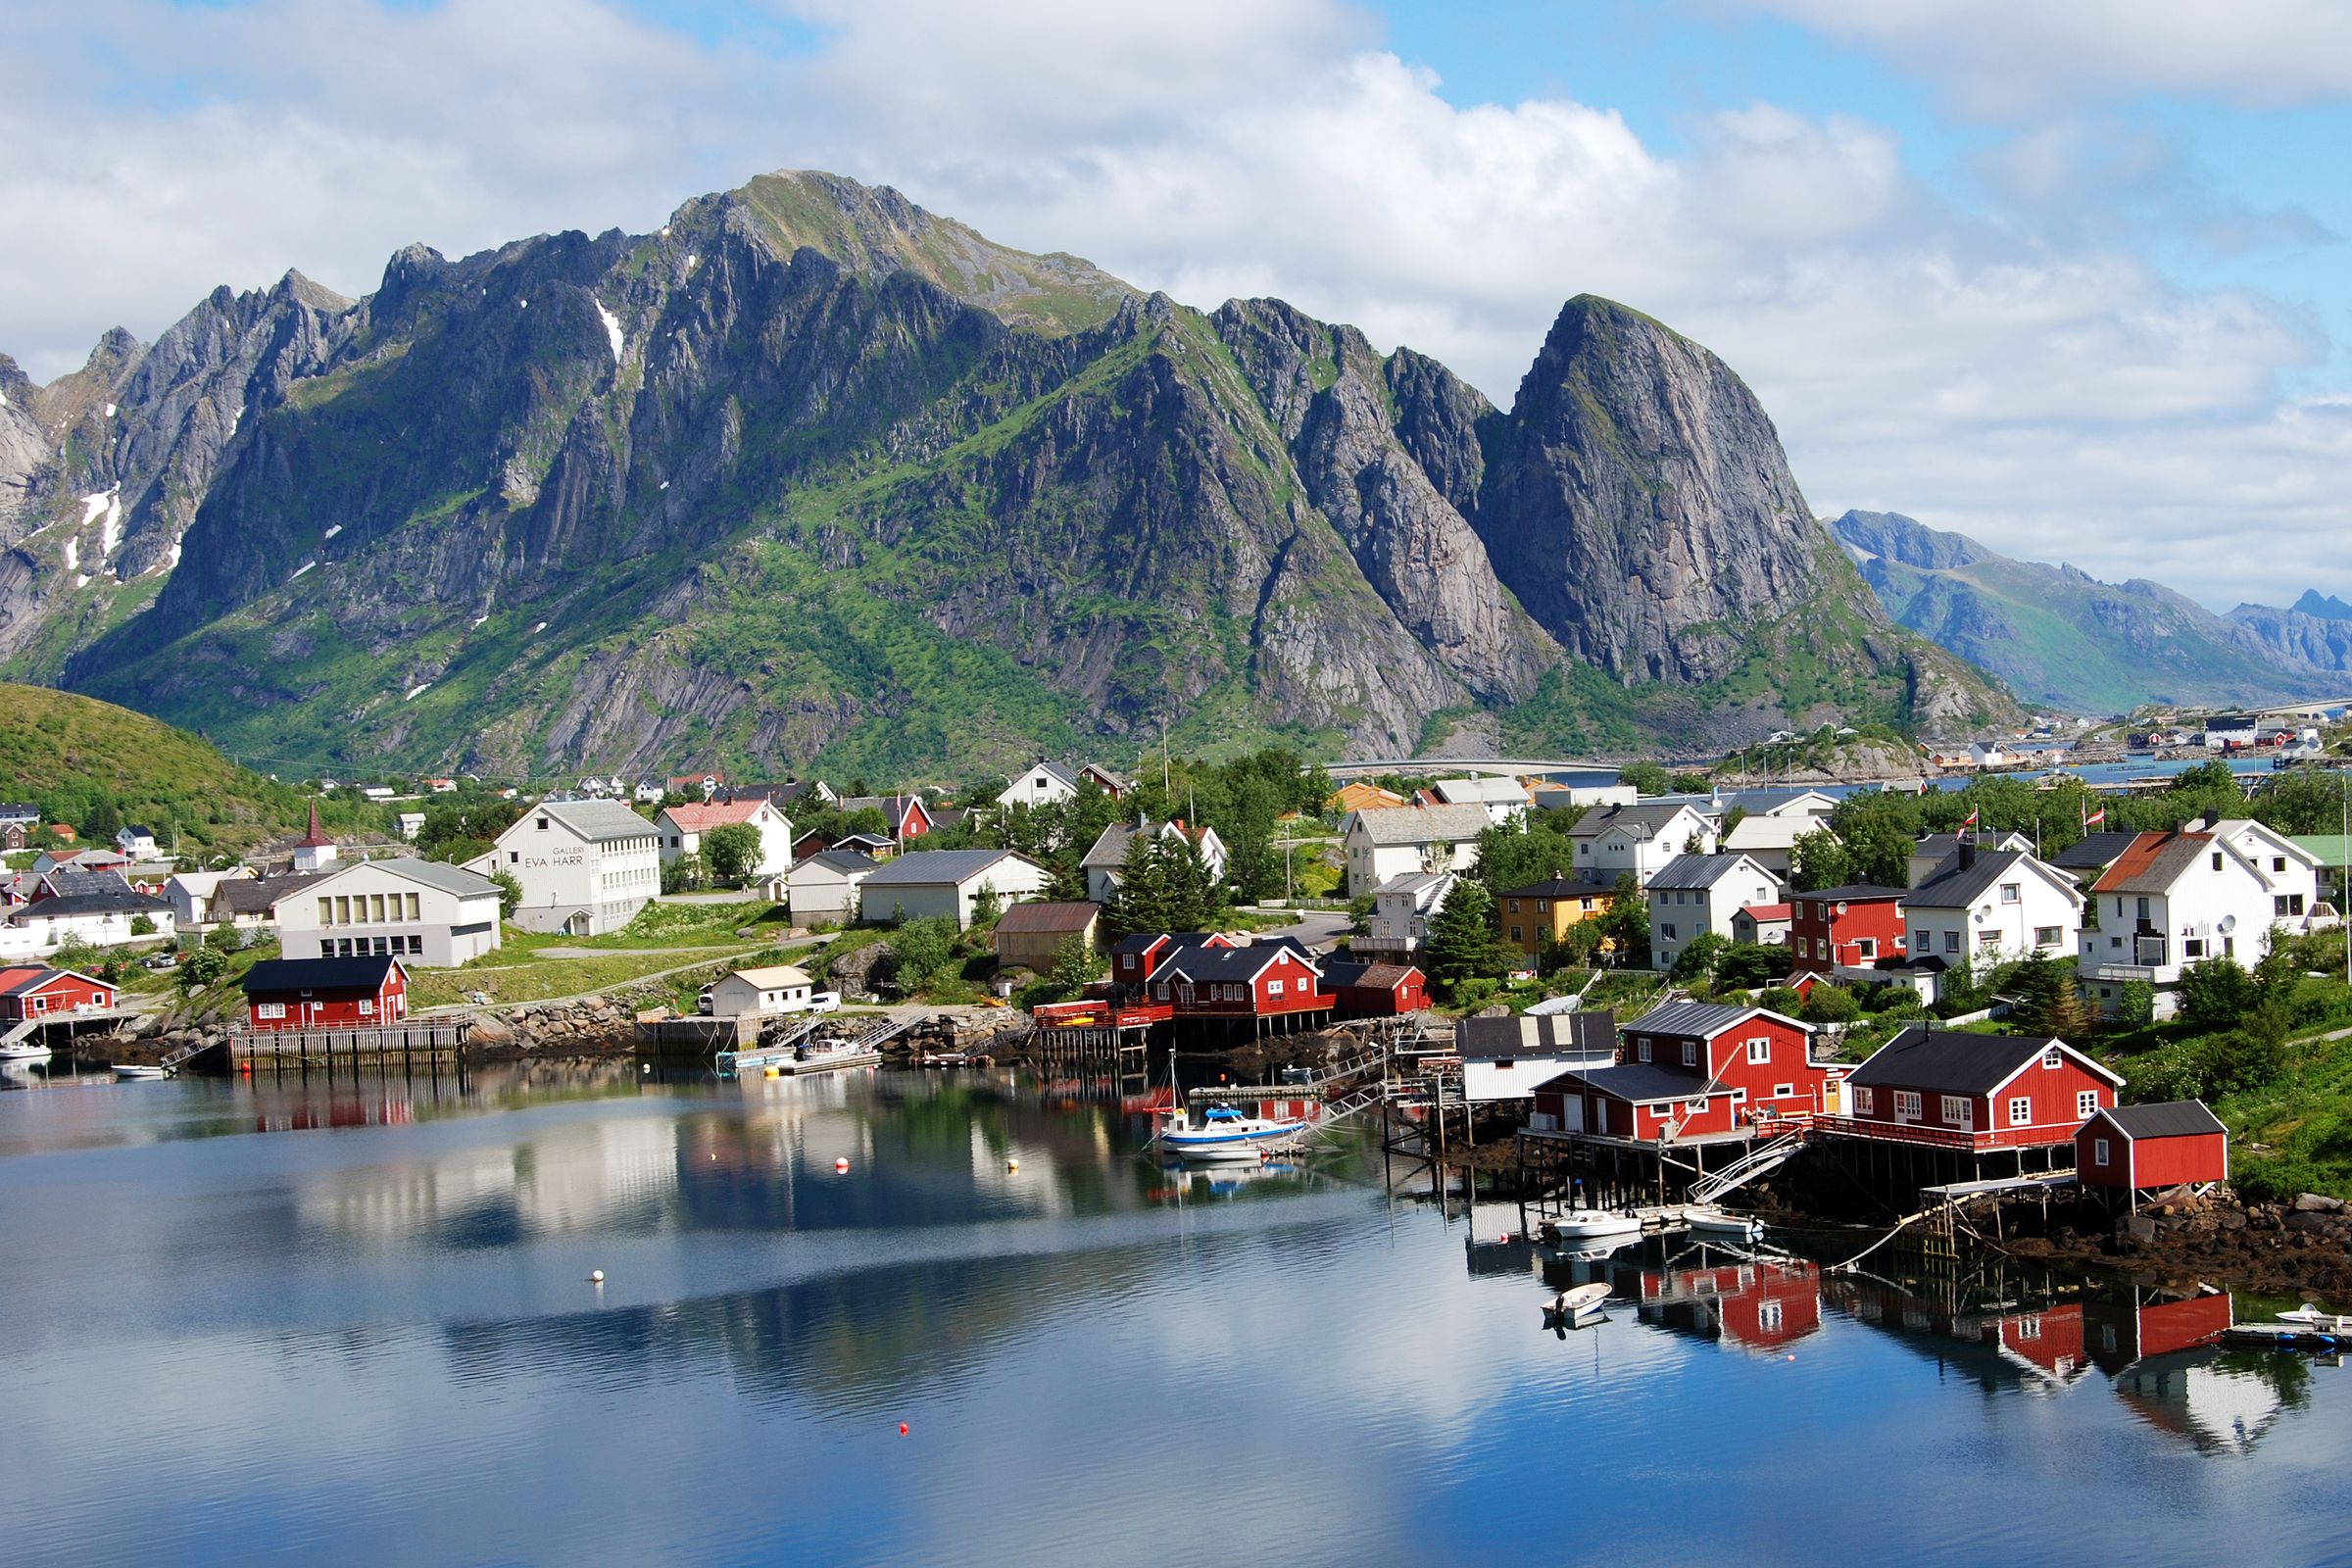 The fishing village of Reine in northern Norway